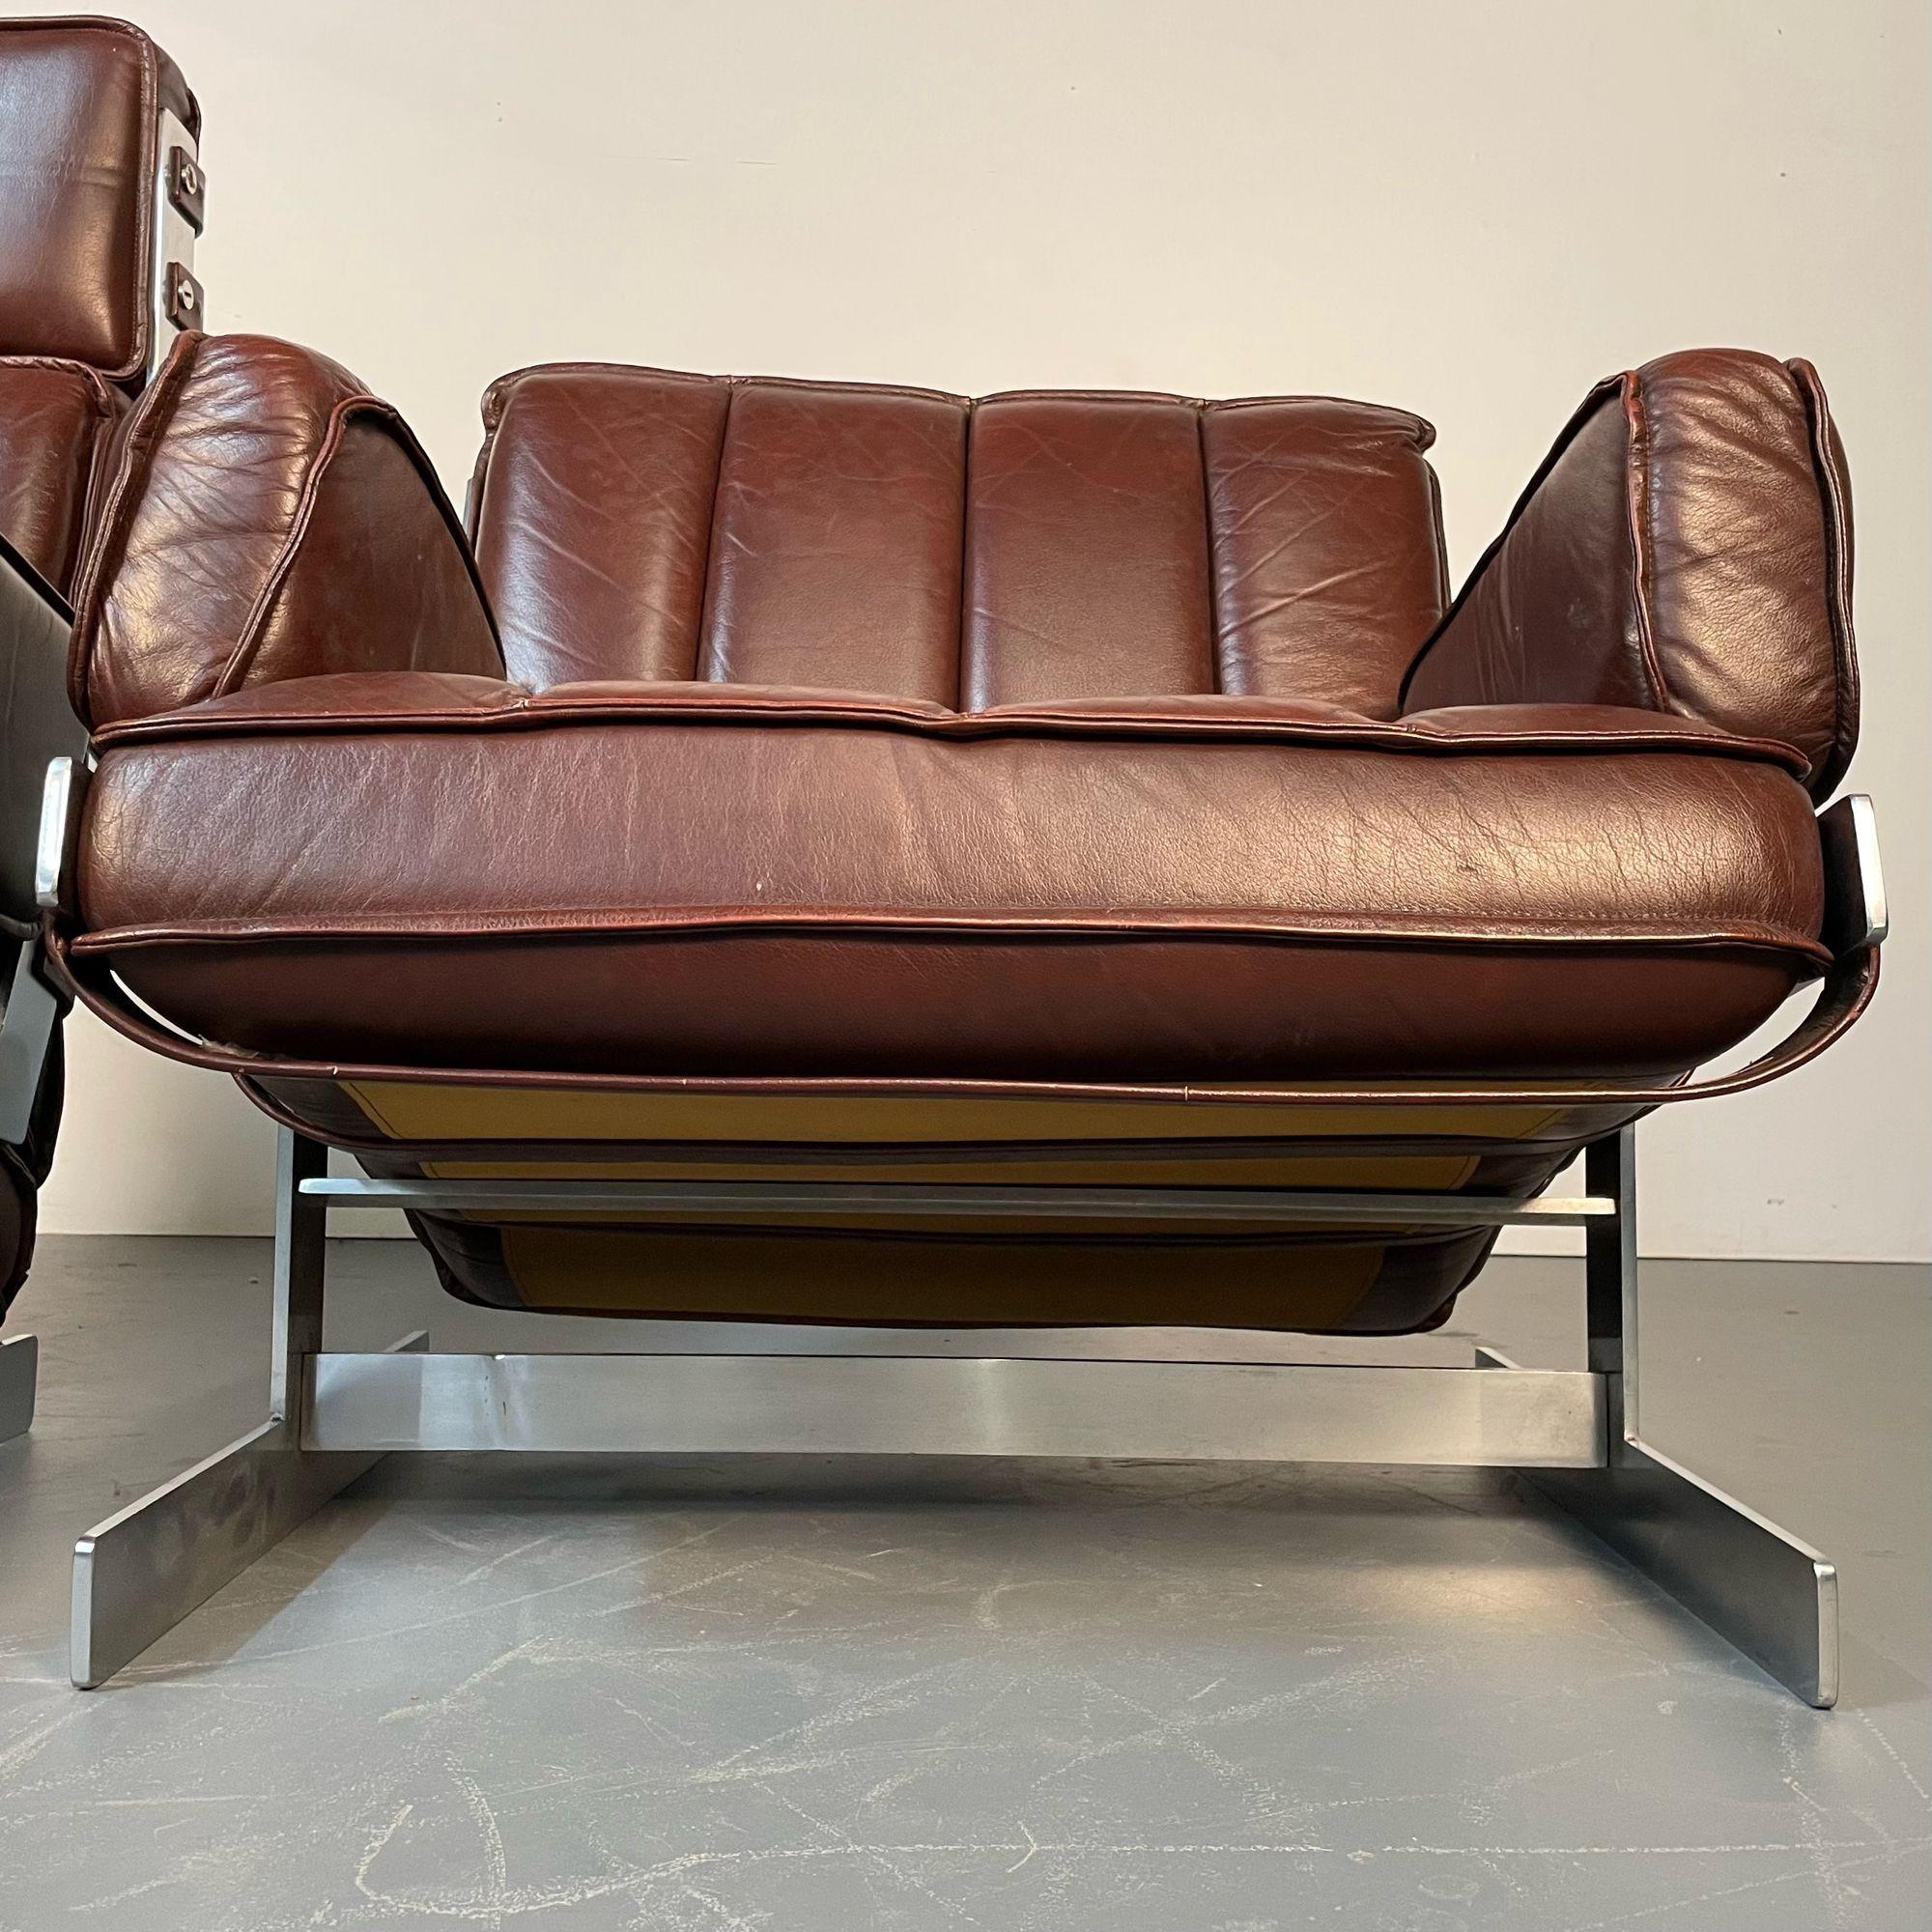 Arne Norell, Swedish Mid-Century Modern Lounge Chairs, Leather, Steel, 1960s For Sale 14